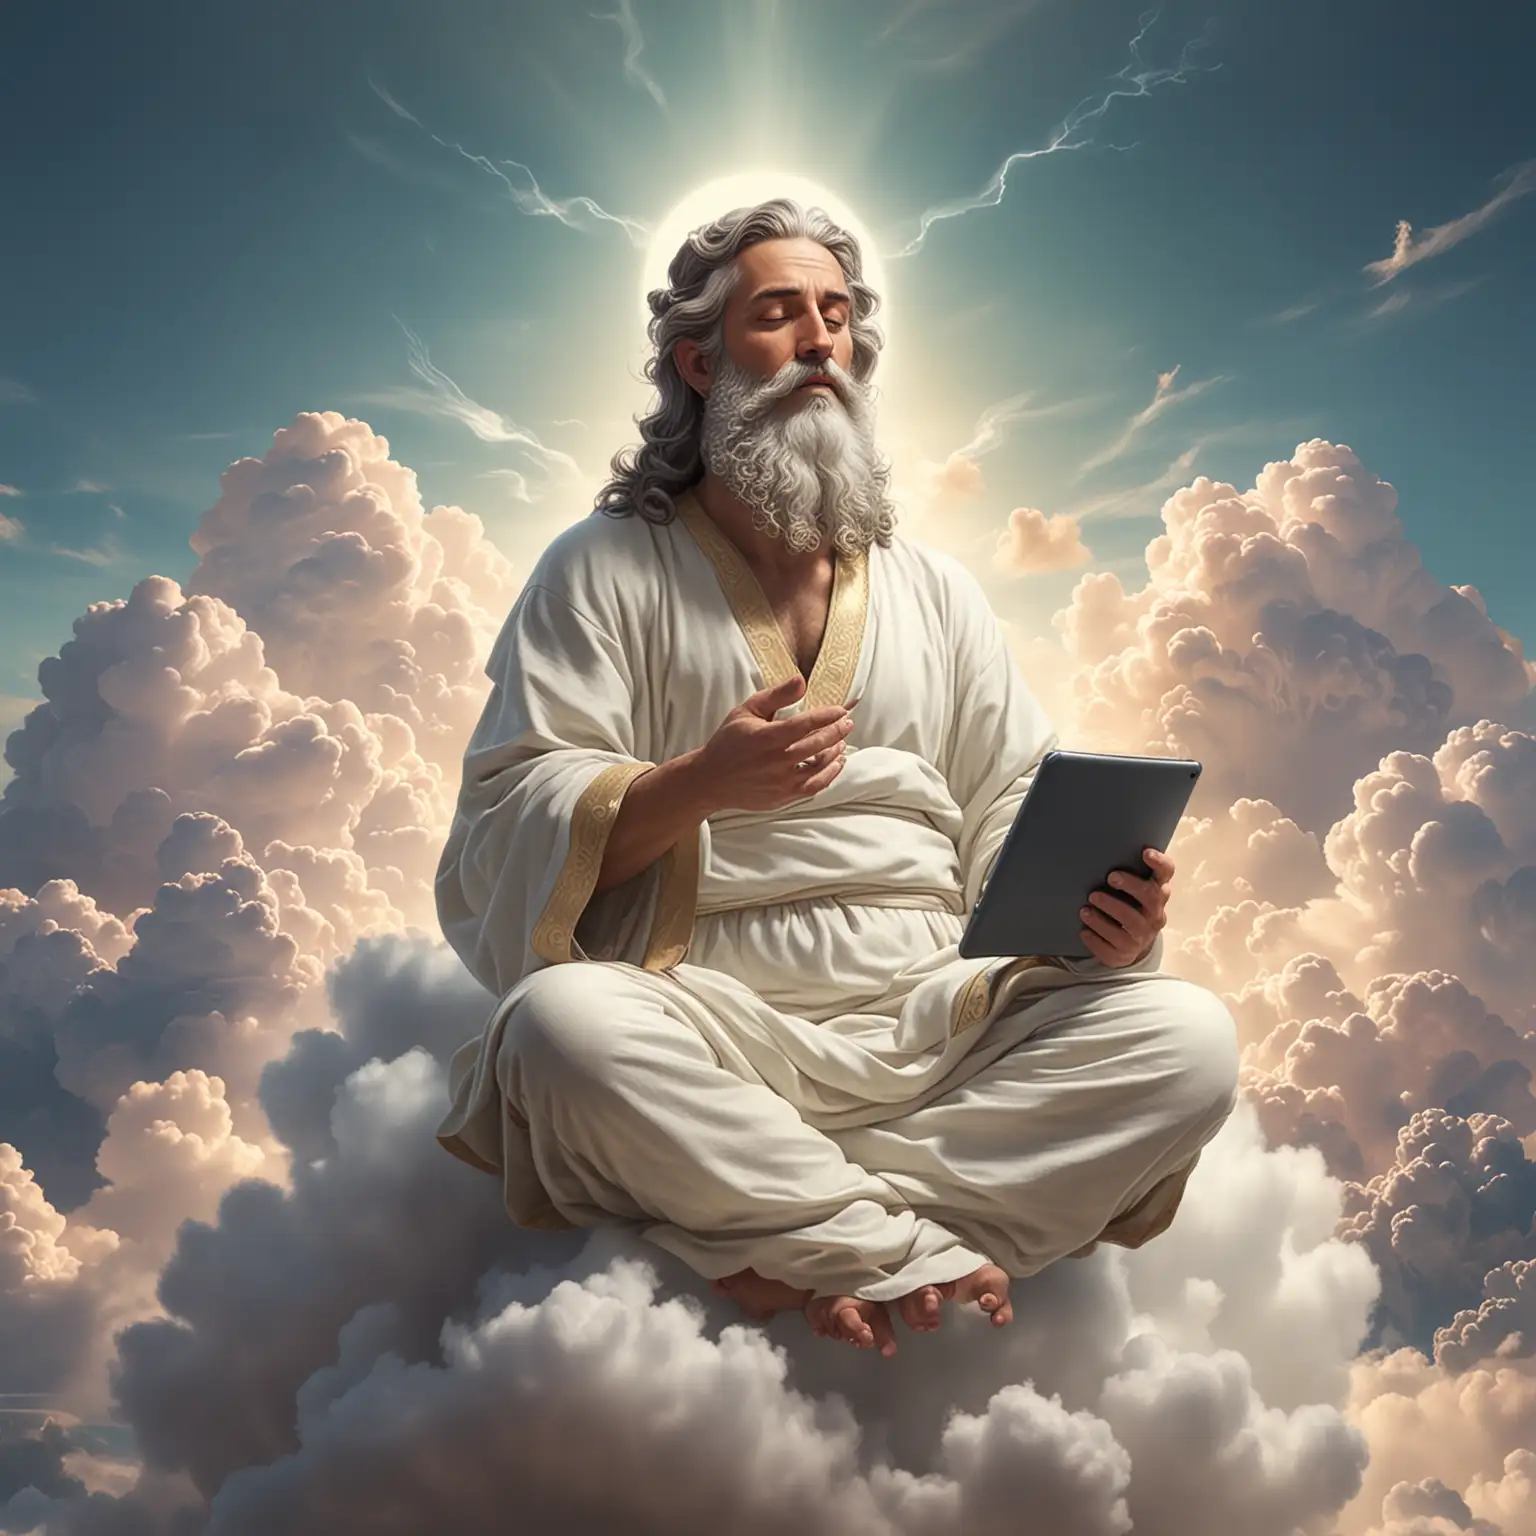 God sitting on the cloud holding a mobile phone and an ipad